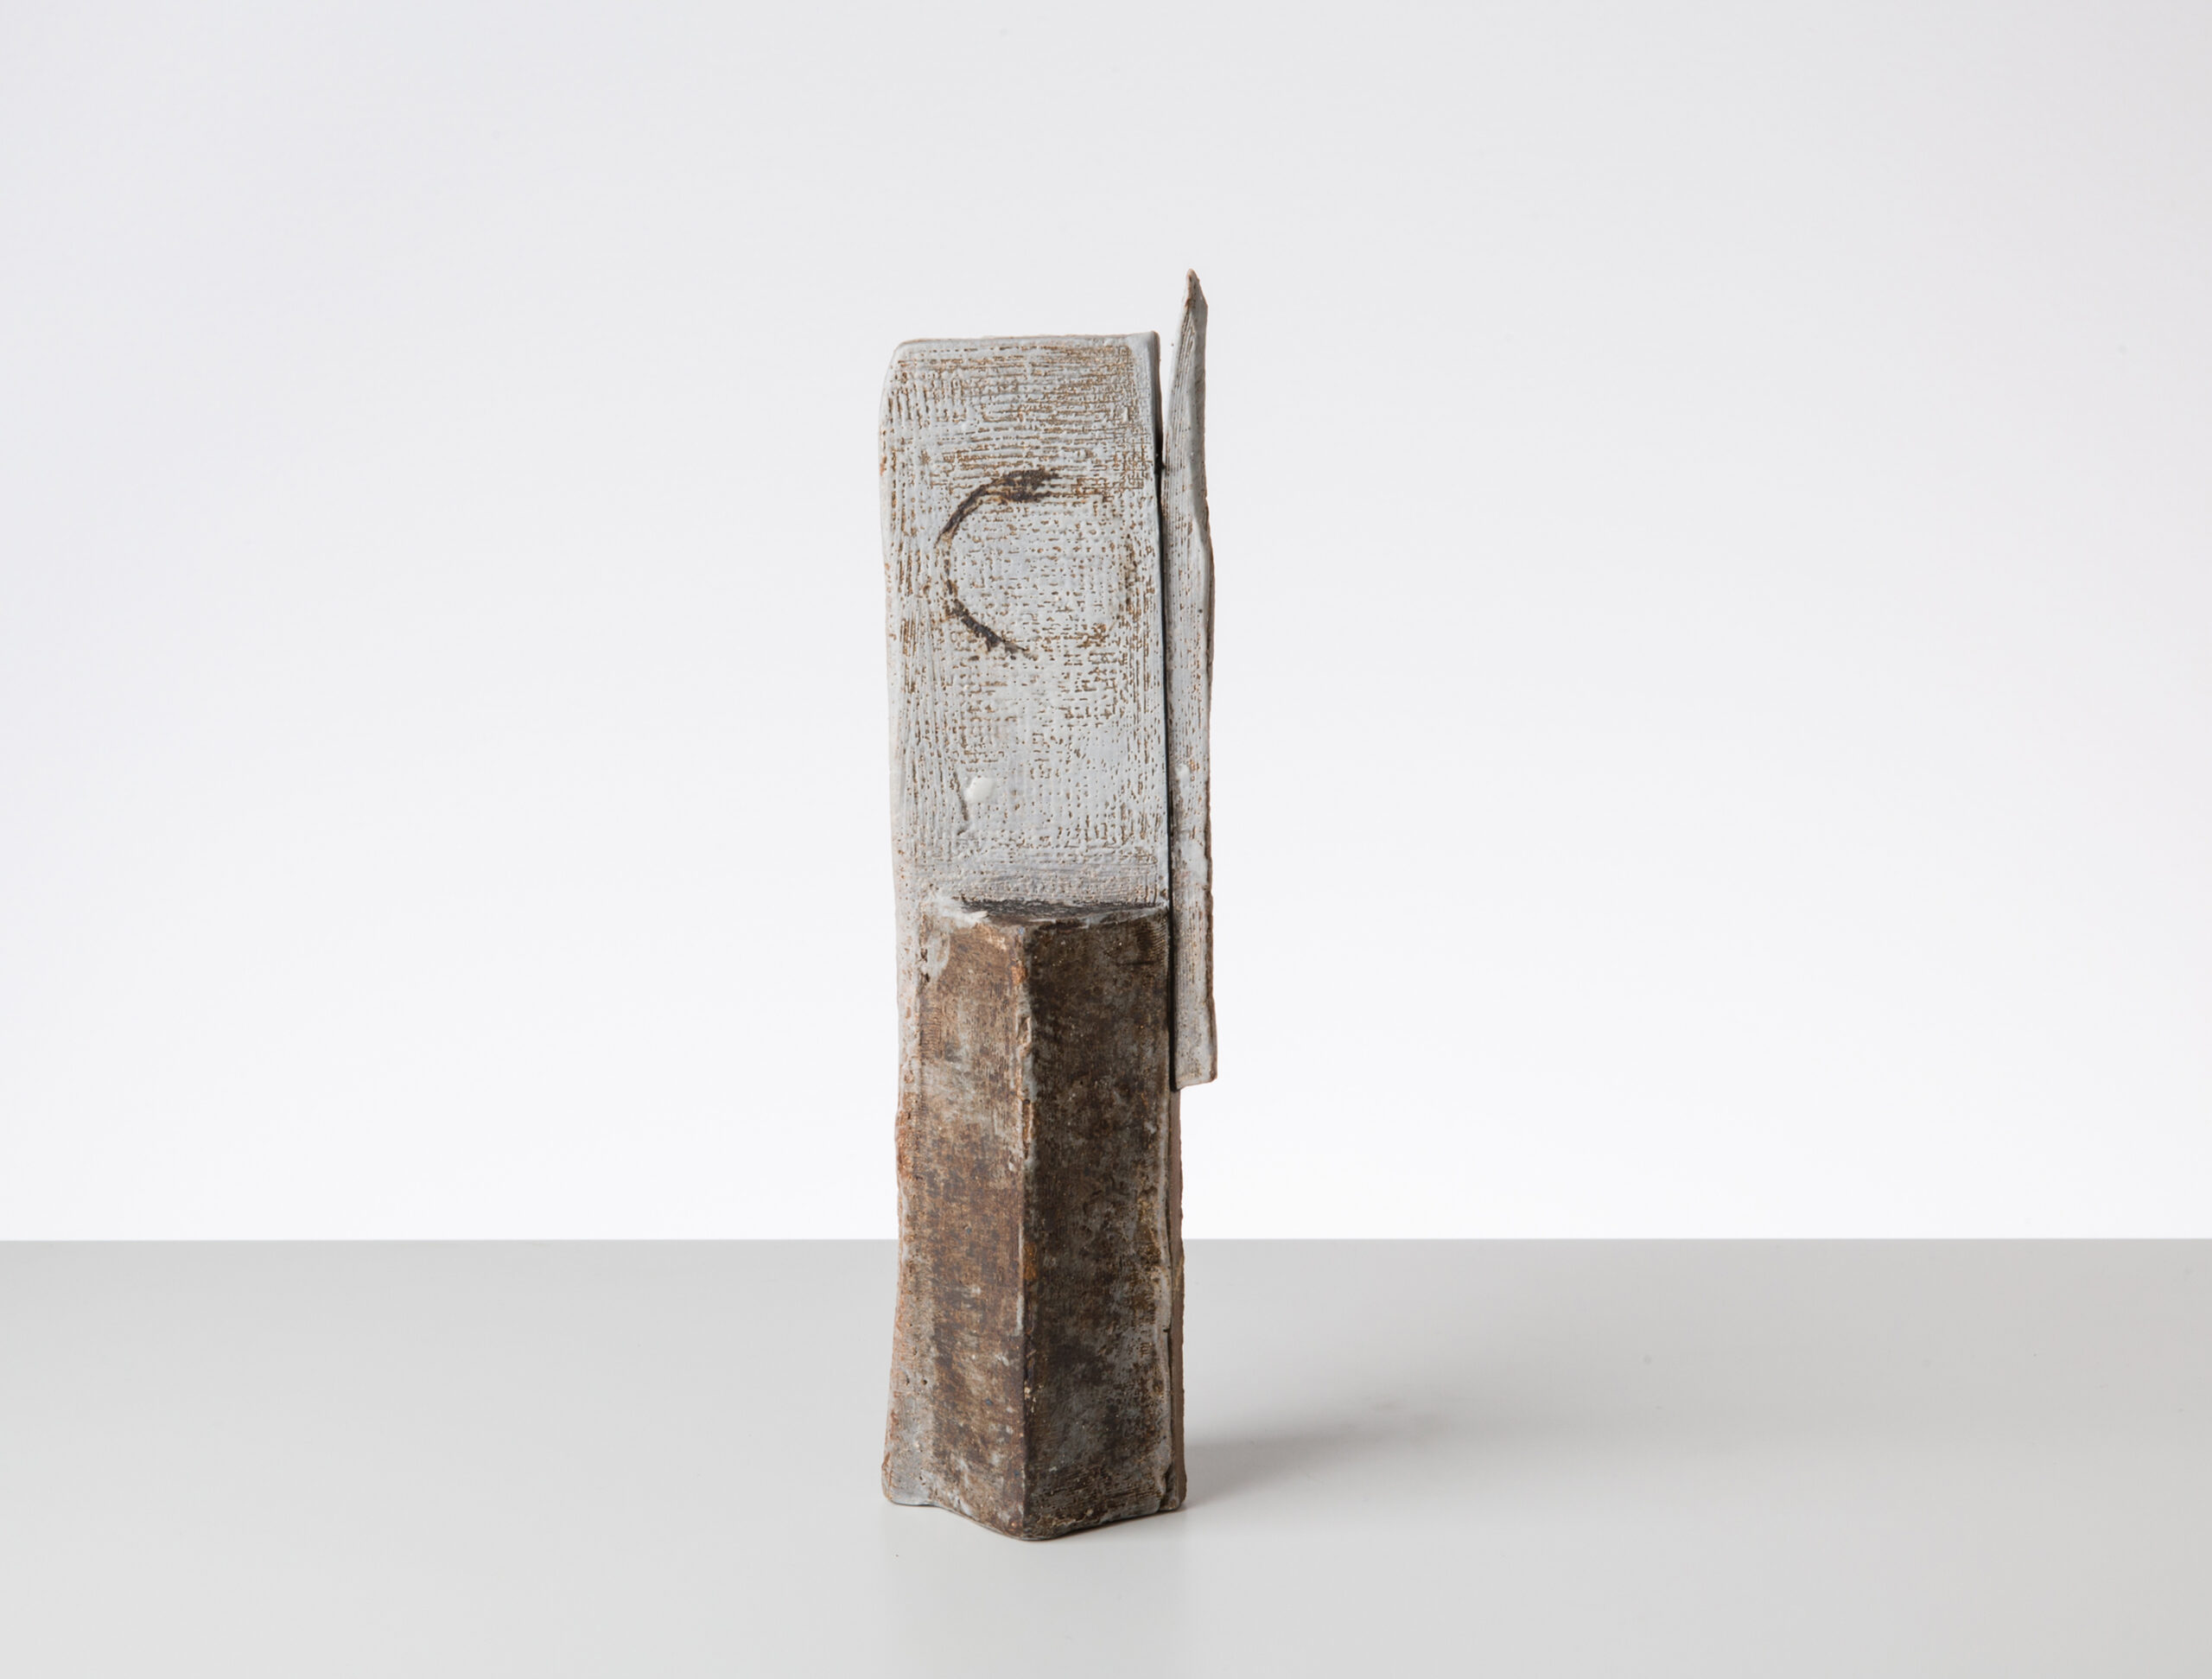 COMPOSITION #8, 2015 stoneware and slip, 9 3/4 x 2 3/4 x 2 1/4 in